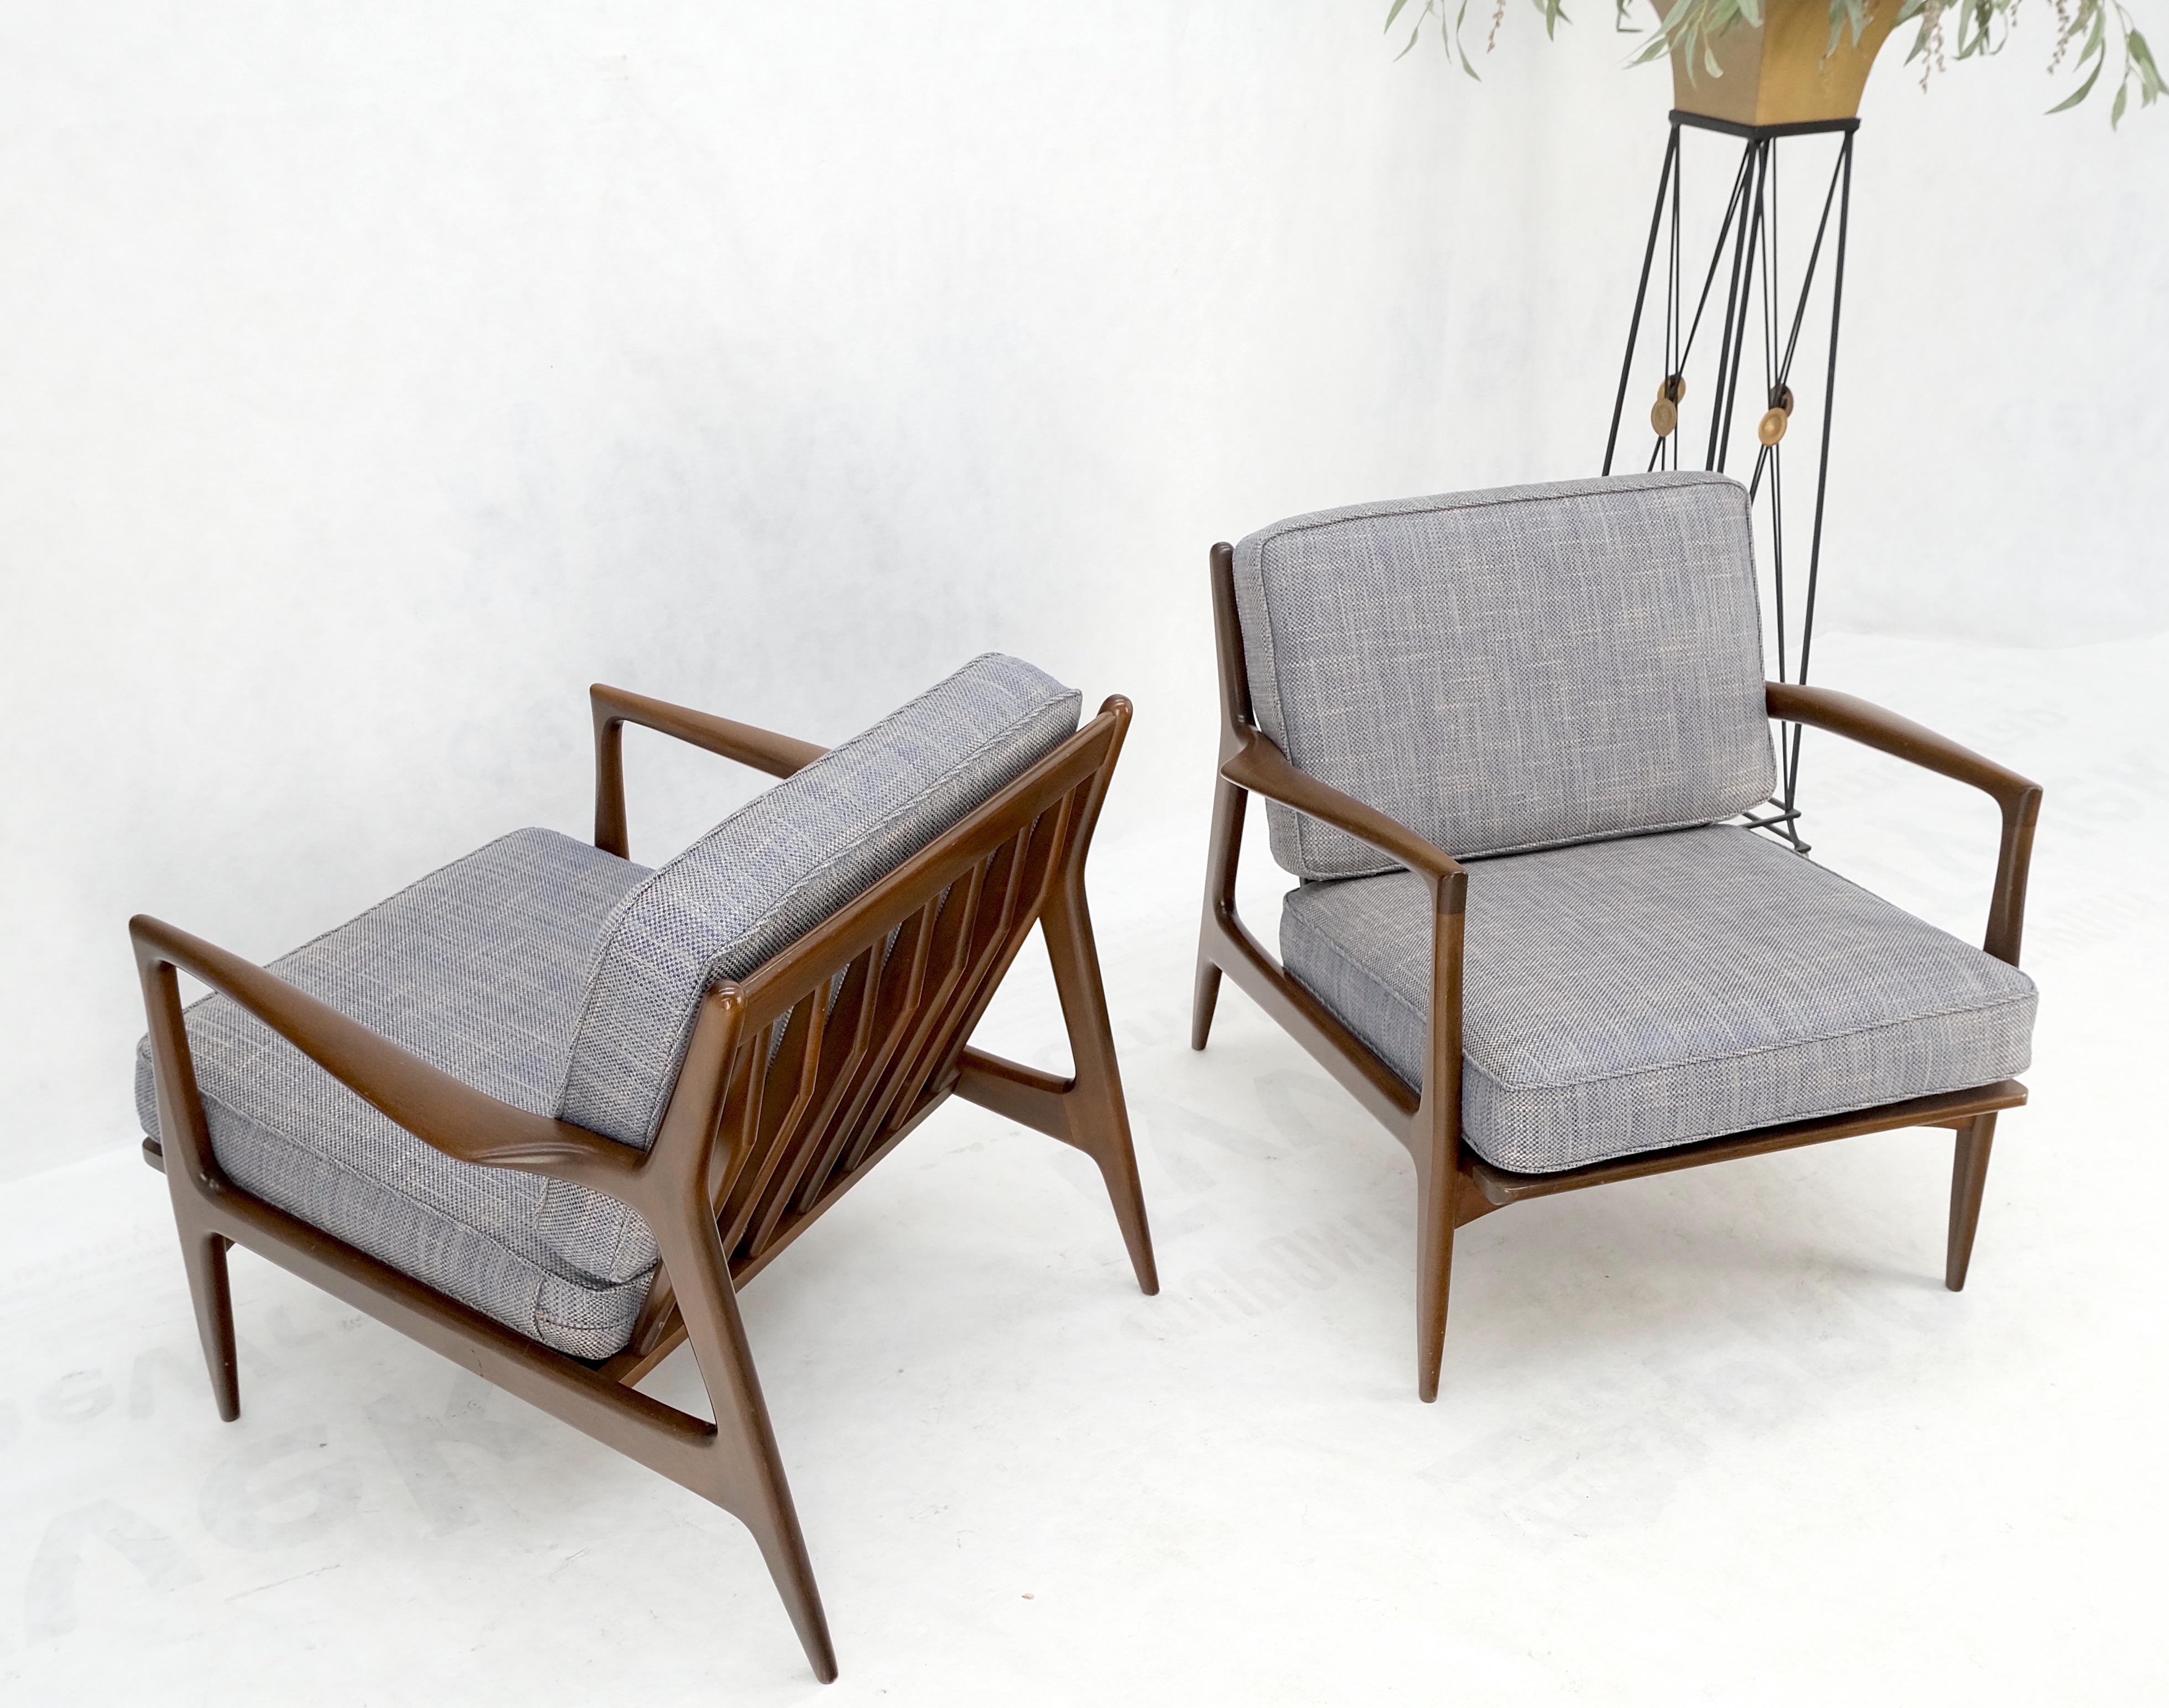 Pair Kofod Larsen Selig Danish Mid-Century Modern Lounge Chairs New Upholstery In Good Condition For Sale In Rockaway, NJ